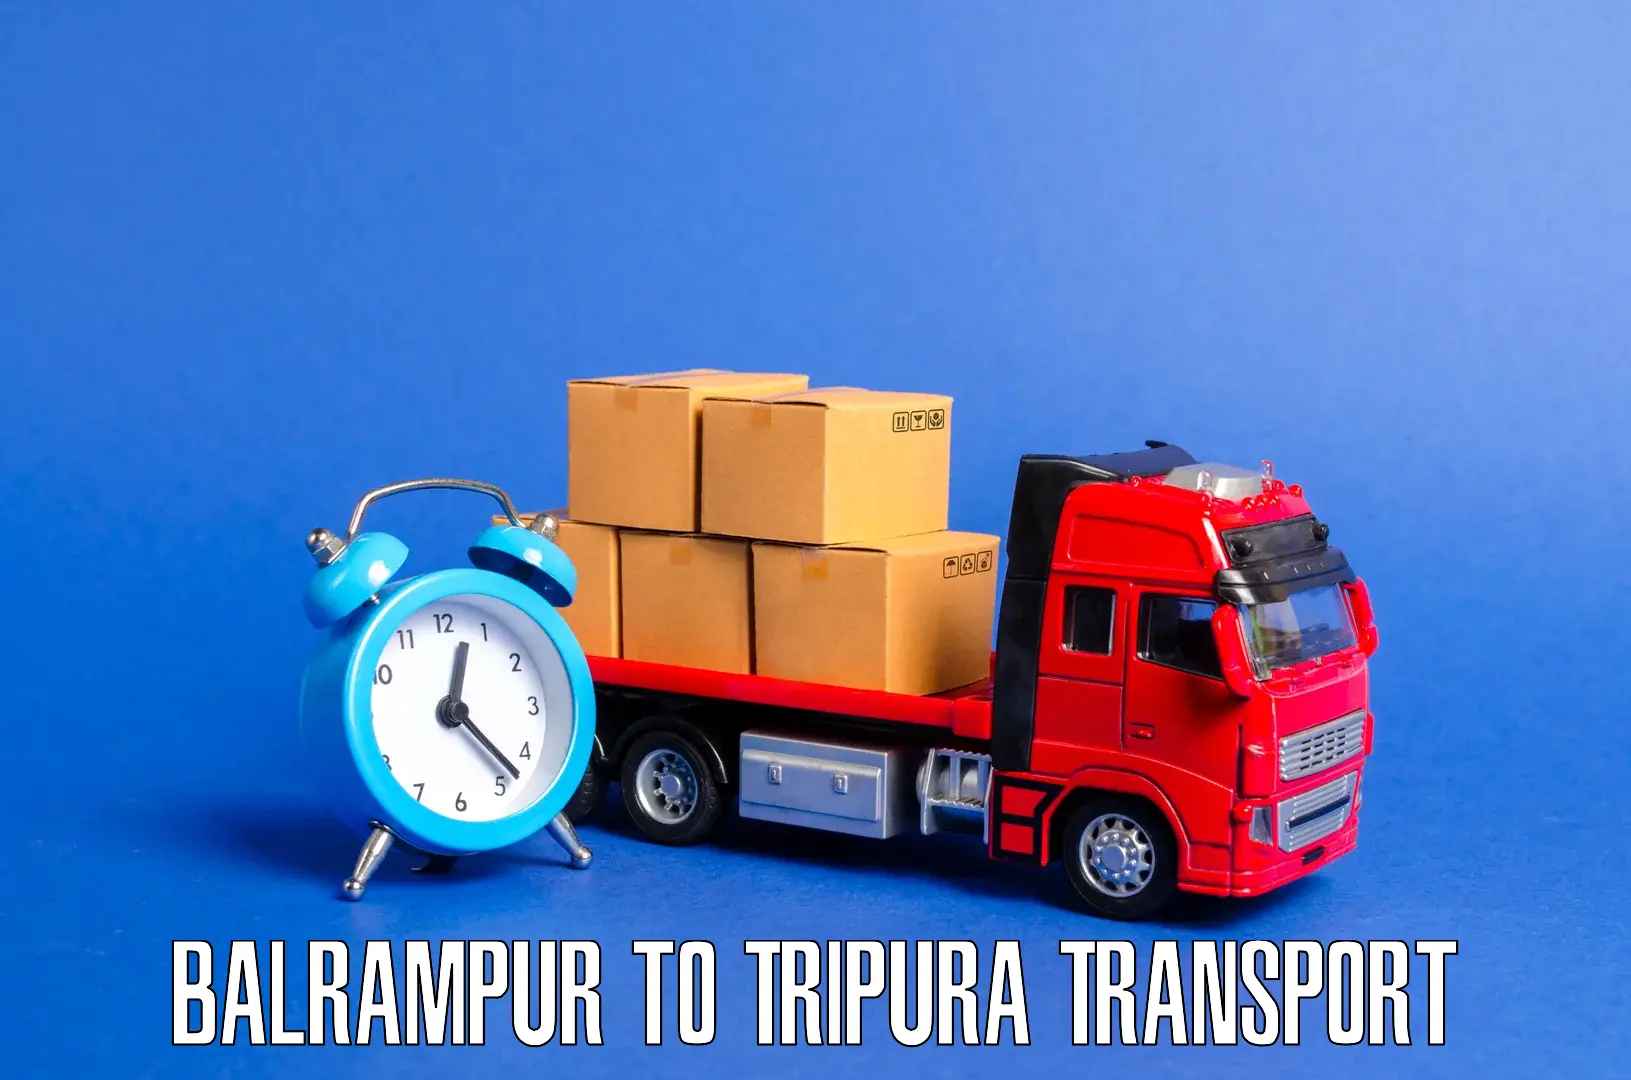 Pick up transport service in Balrampur to North Tripura